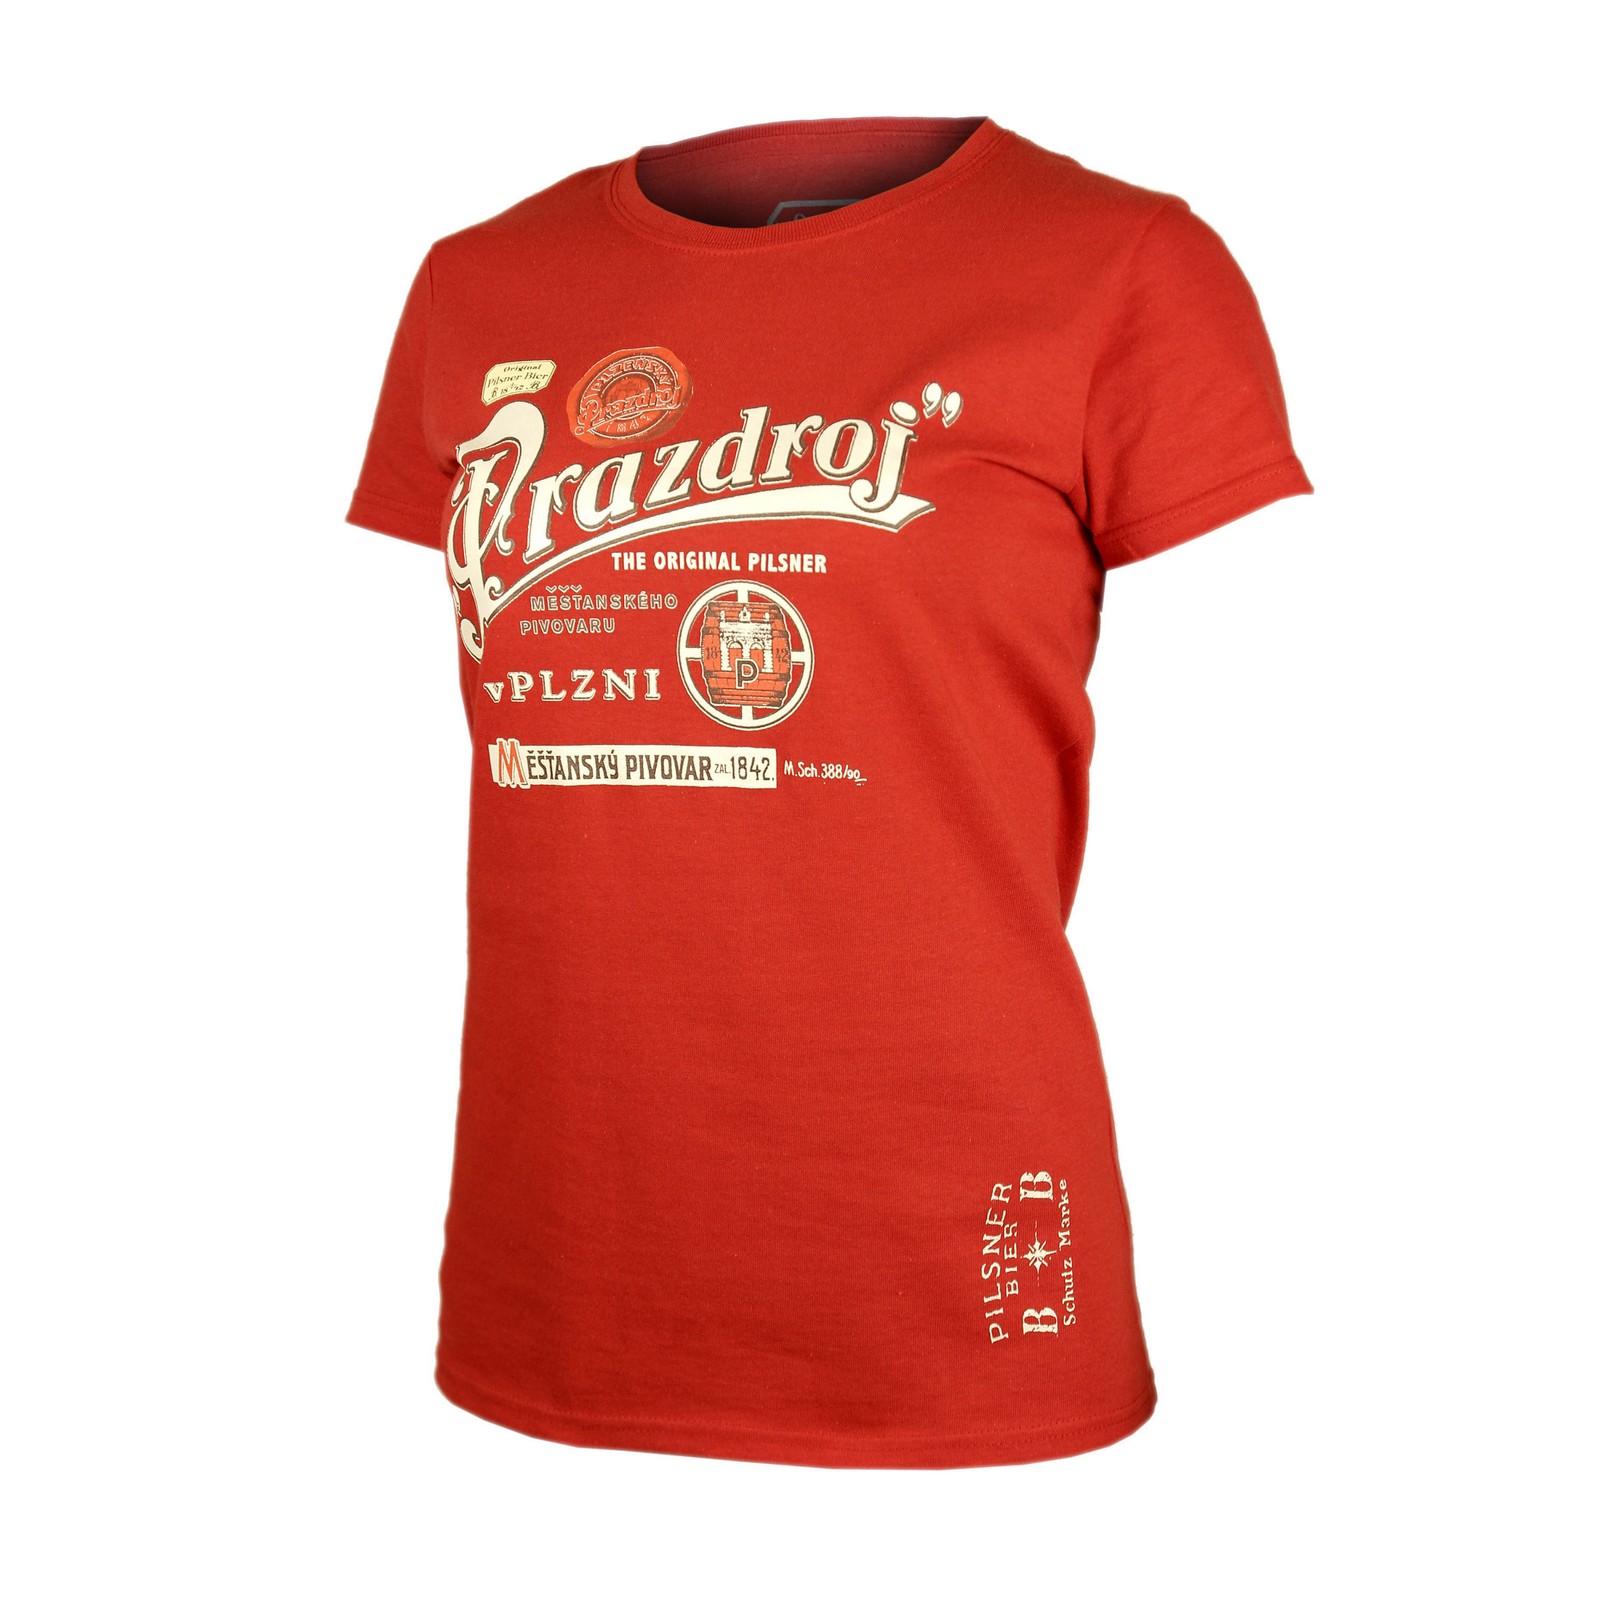 Ladies T-shirt Pilsner Urquell red barrel with embroidery